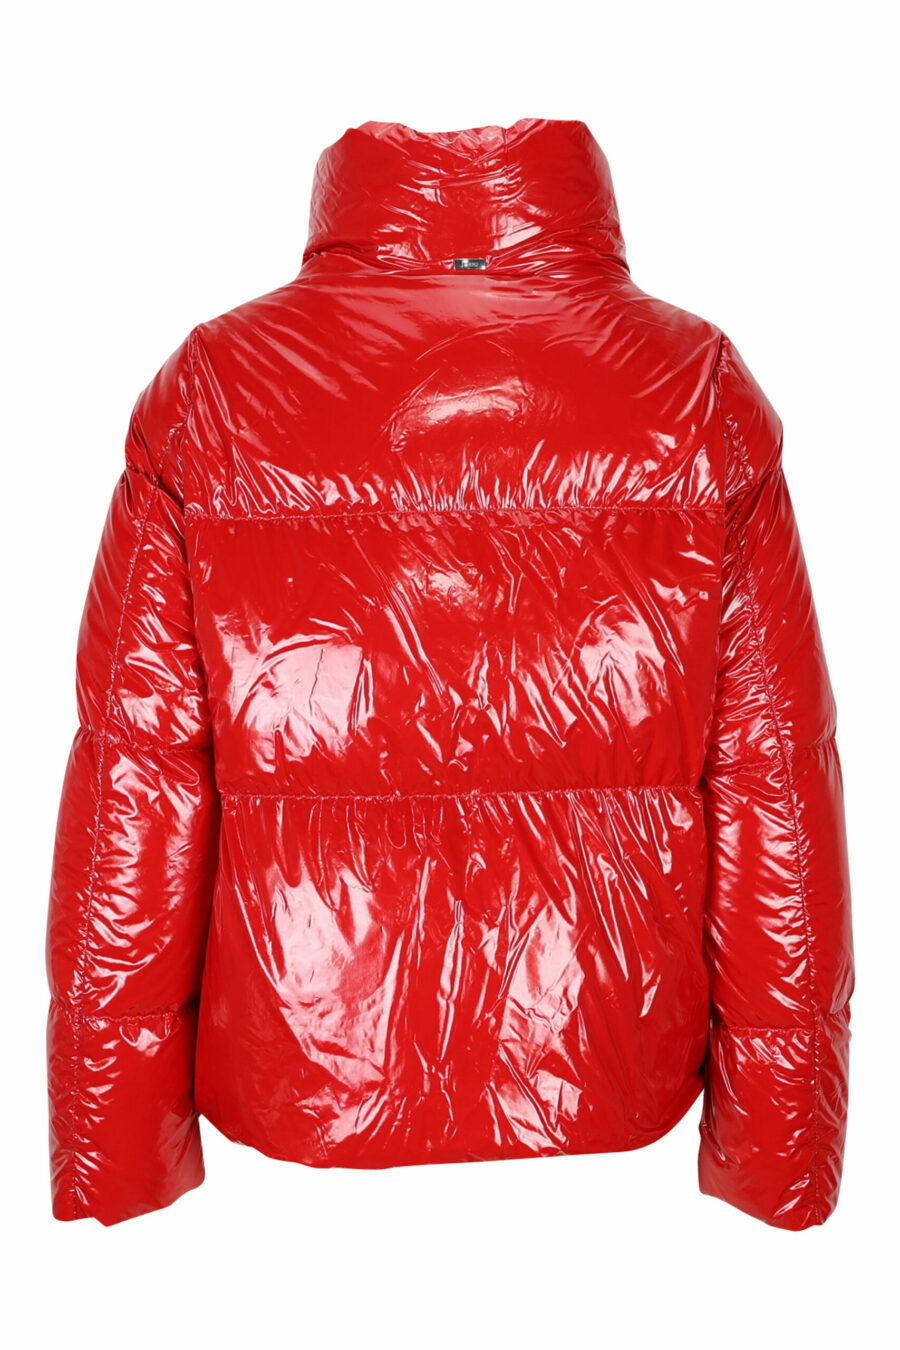 Red bomber jacket "gloss" - 8055721719696 2 scaled